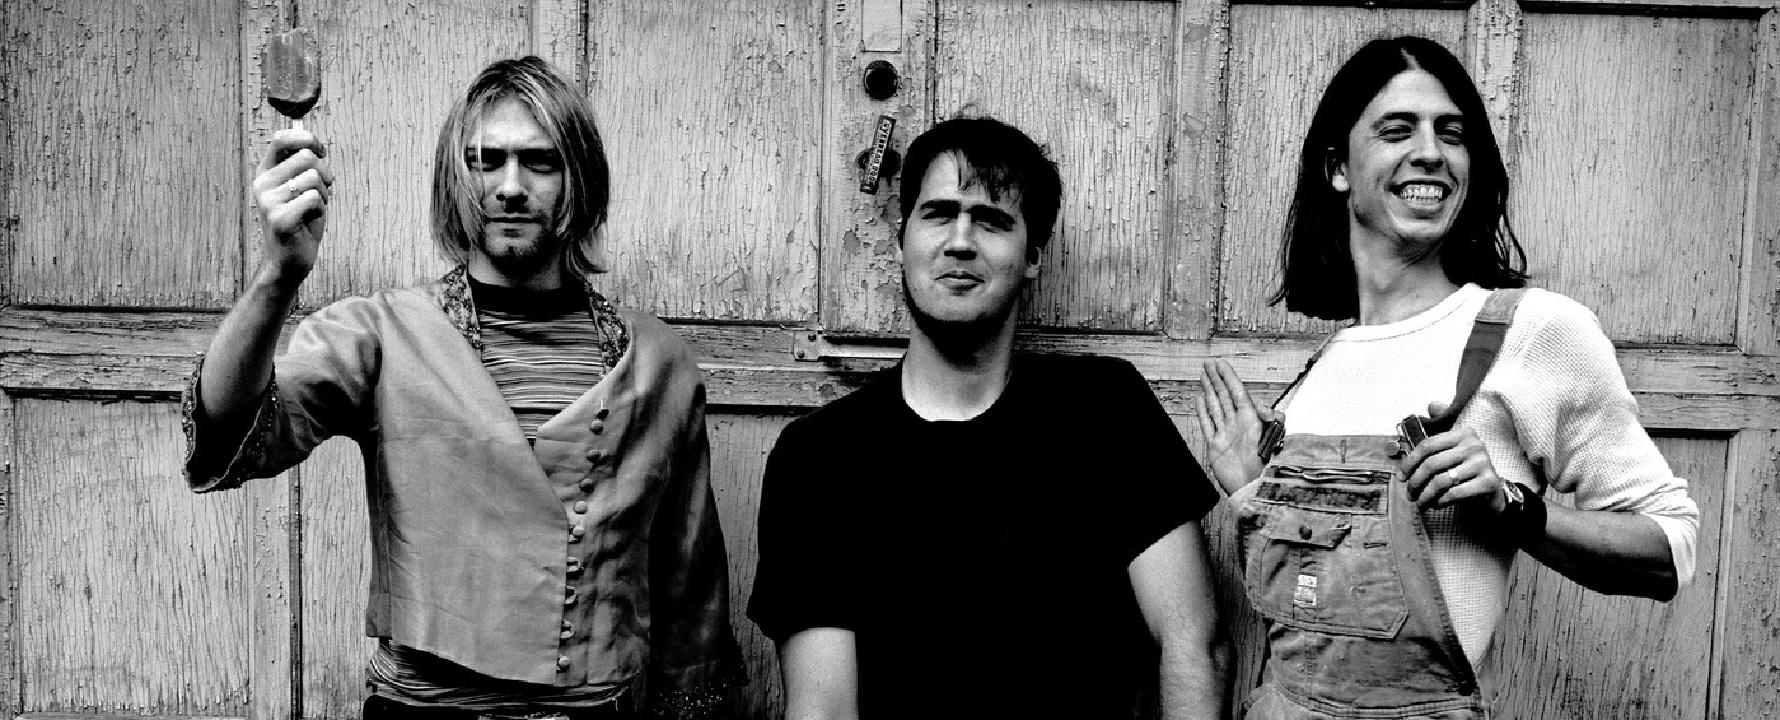 Promotional photograph of Nirvana.